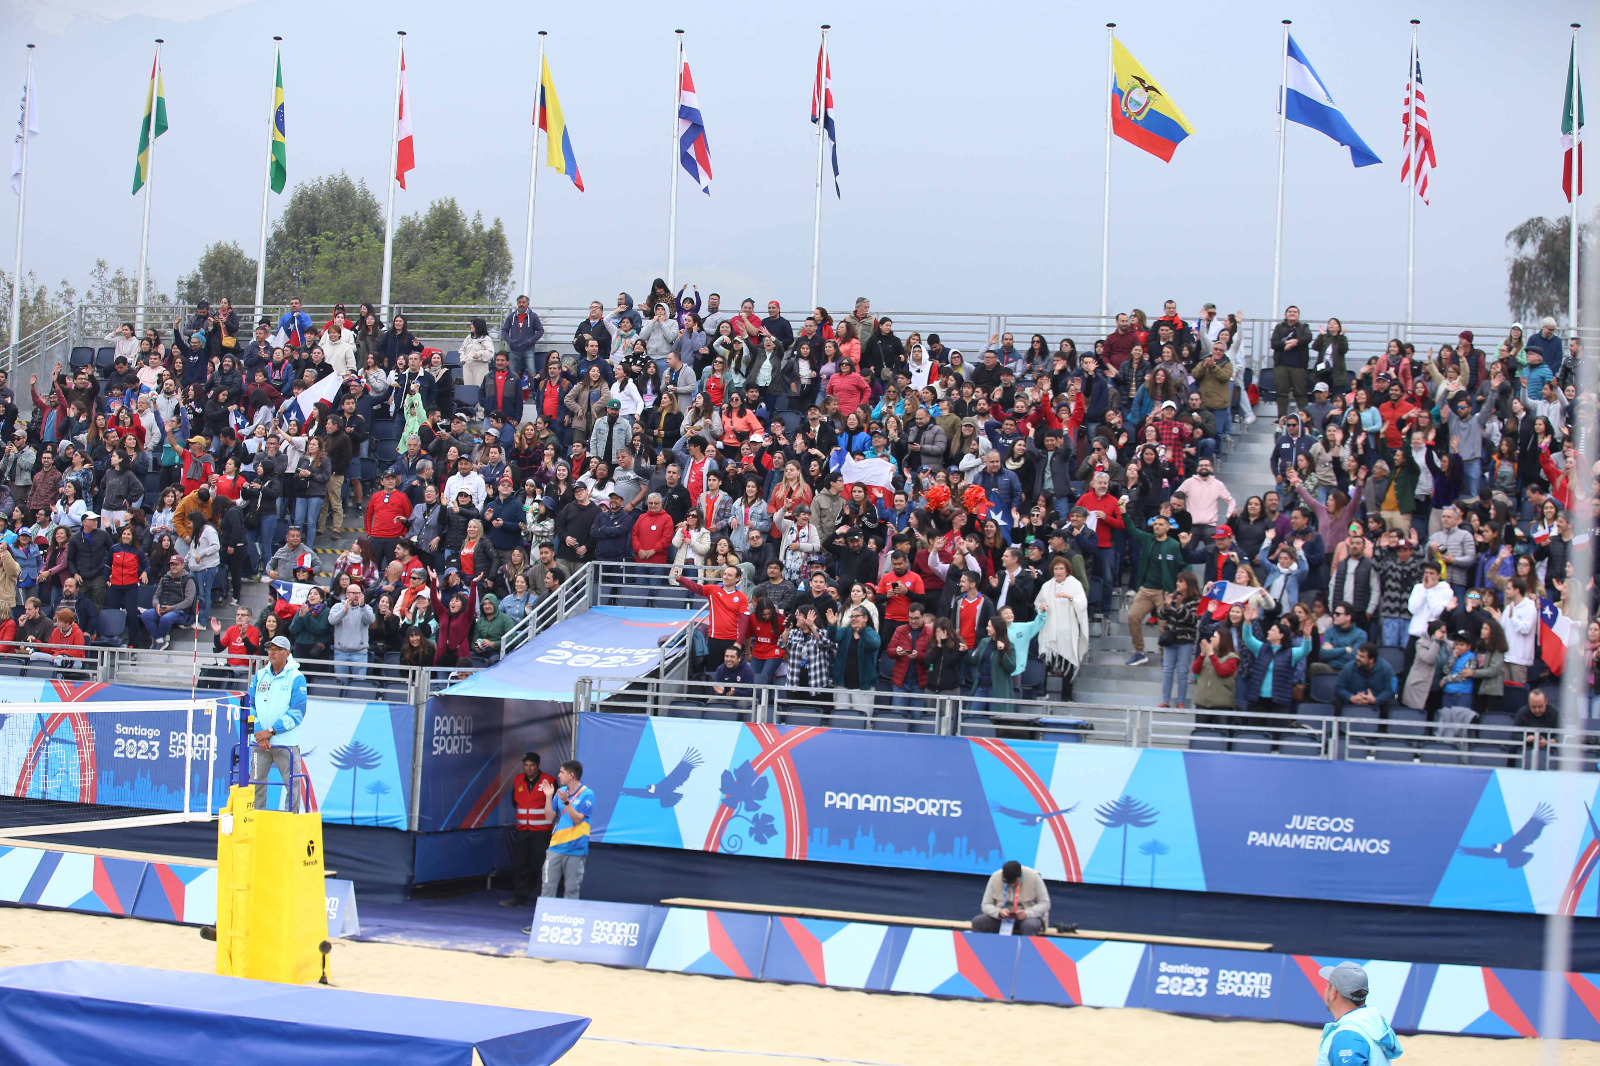 A great atmosphere in Santiago 2023 beach volleyball